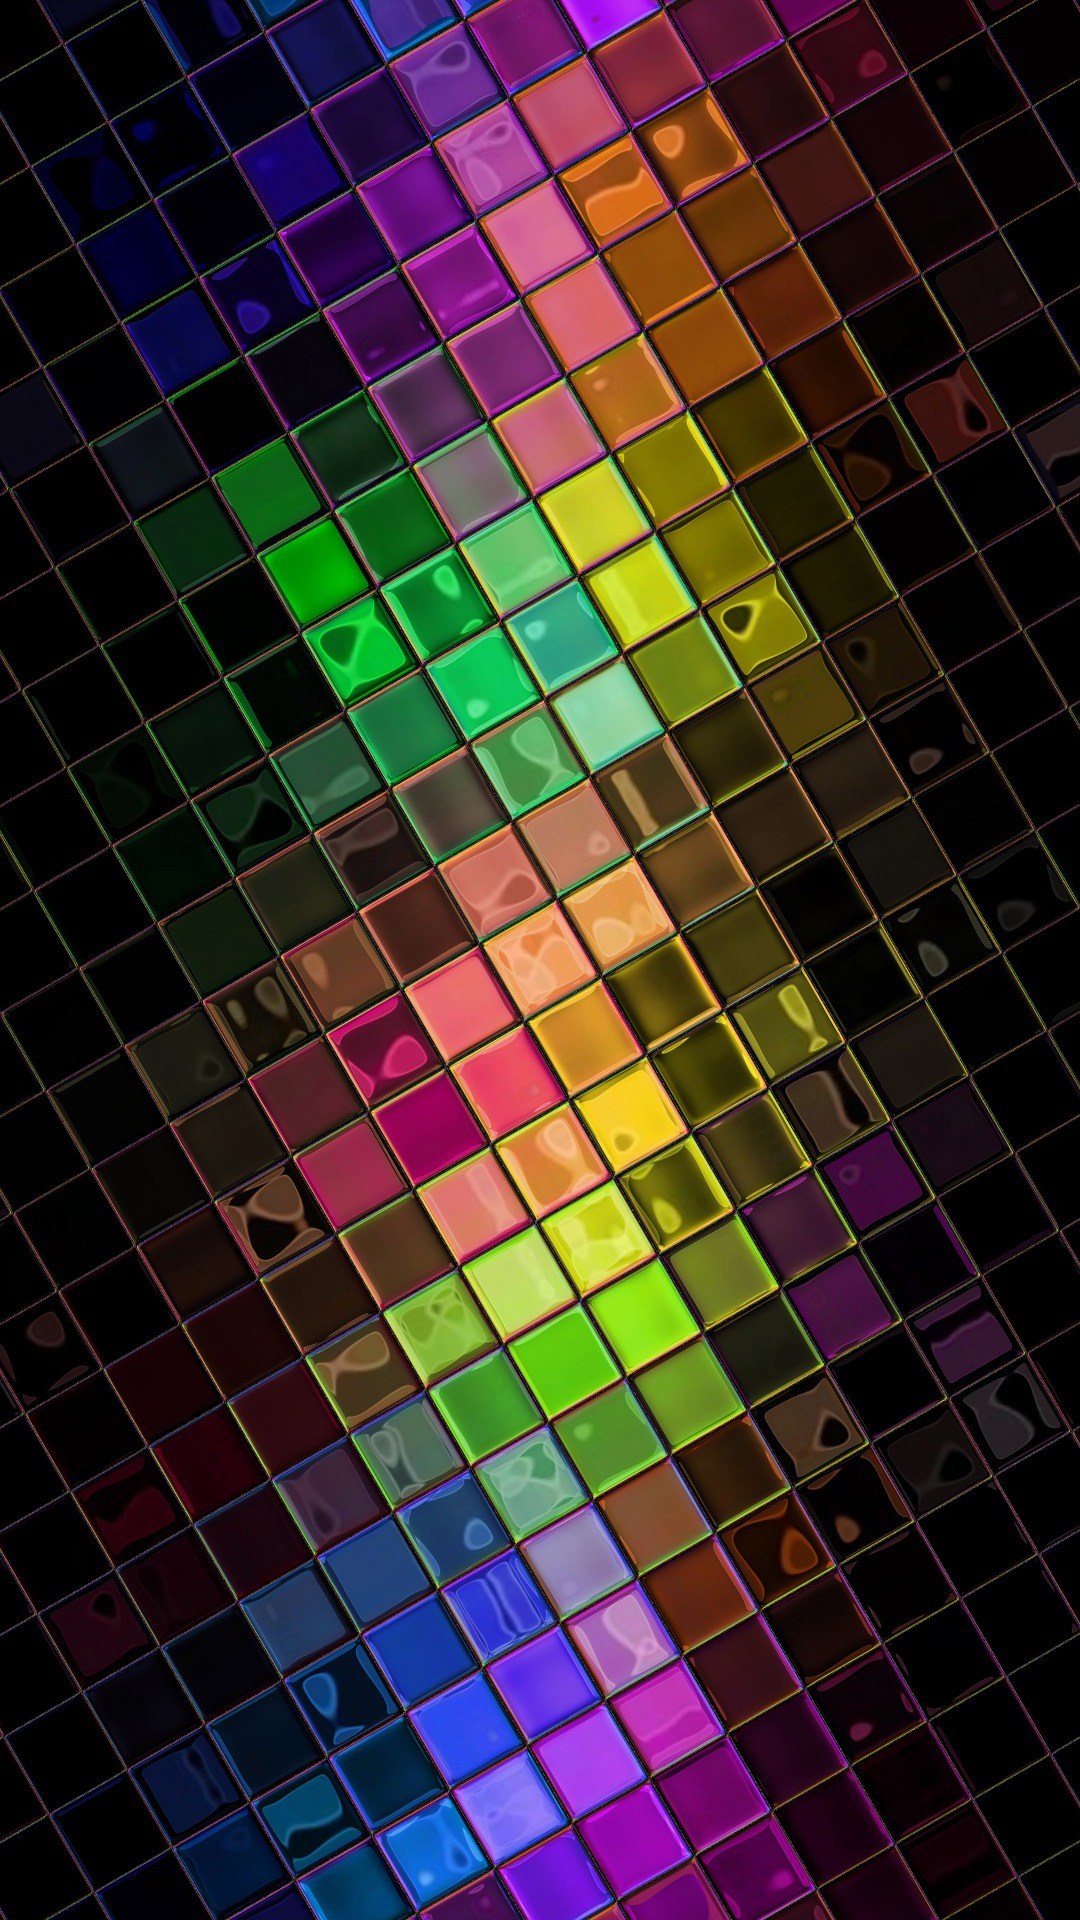 squares   Full HD wallpapers for iPhone 6 Plus